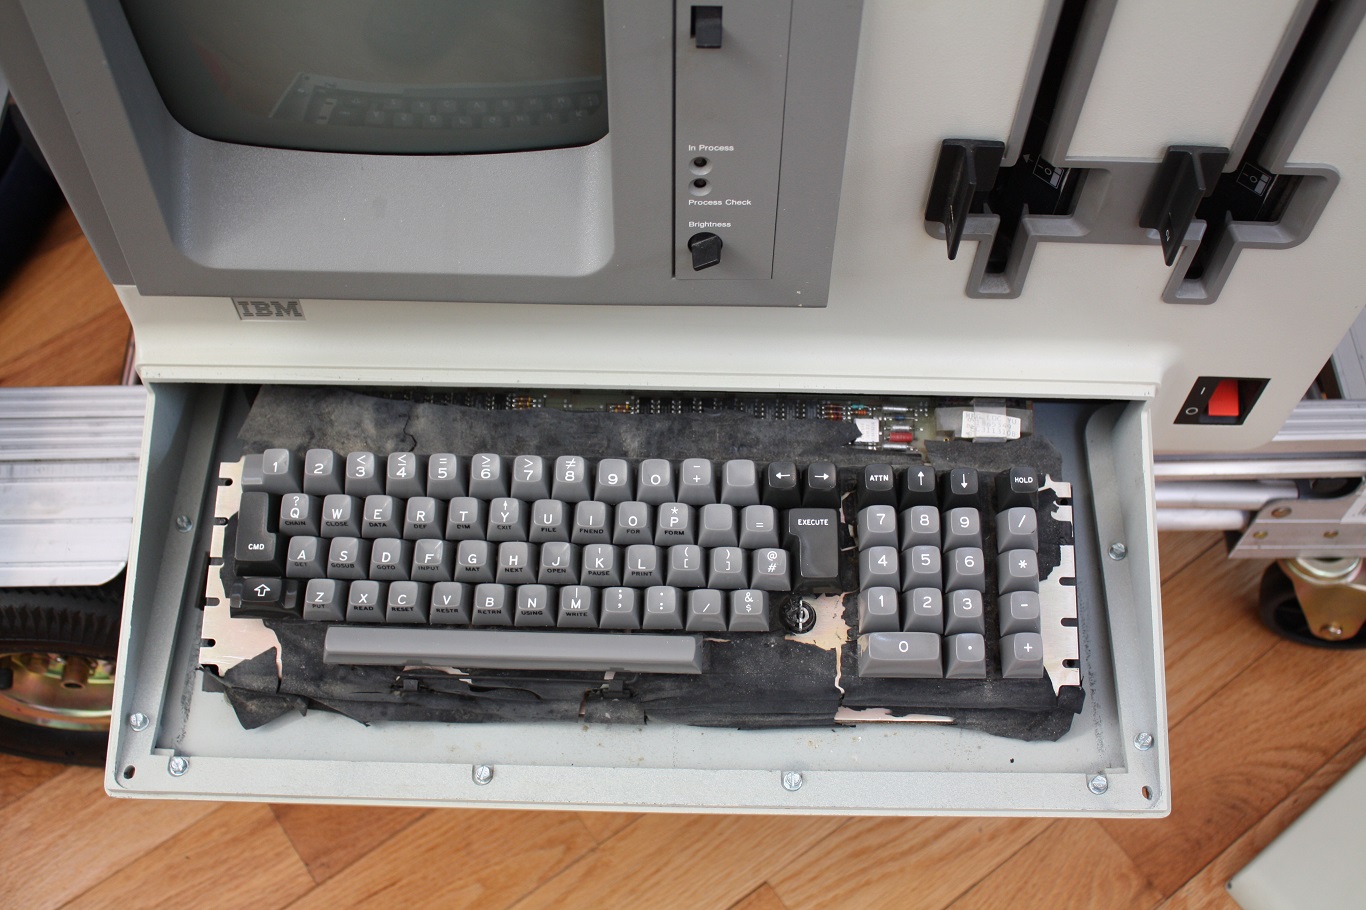 IBM 5120 - key caps cleaned and installed